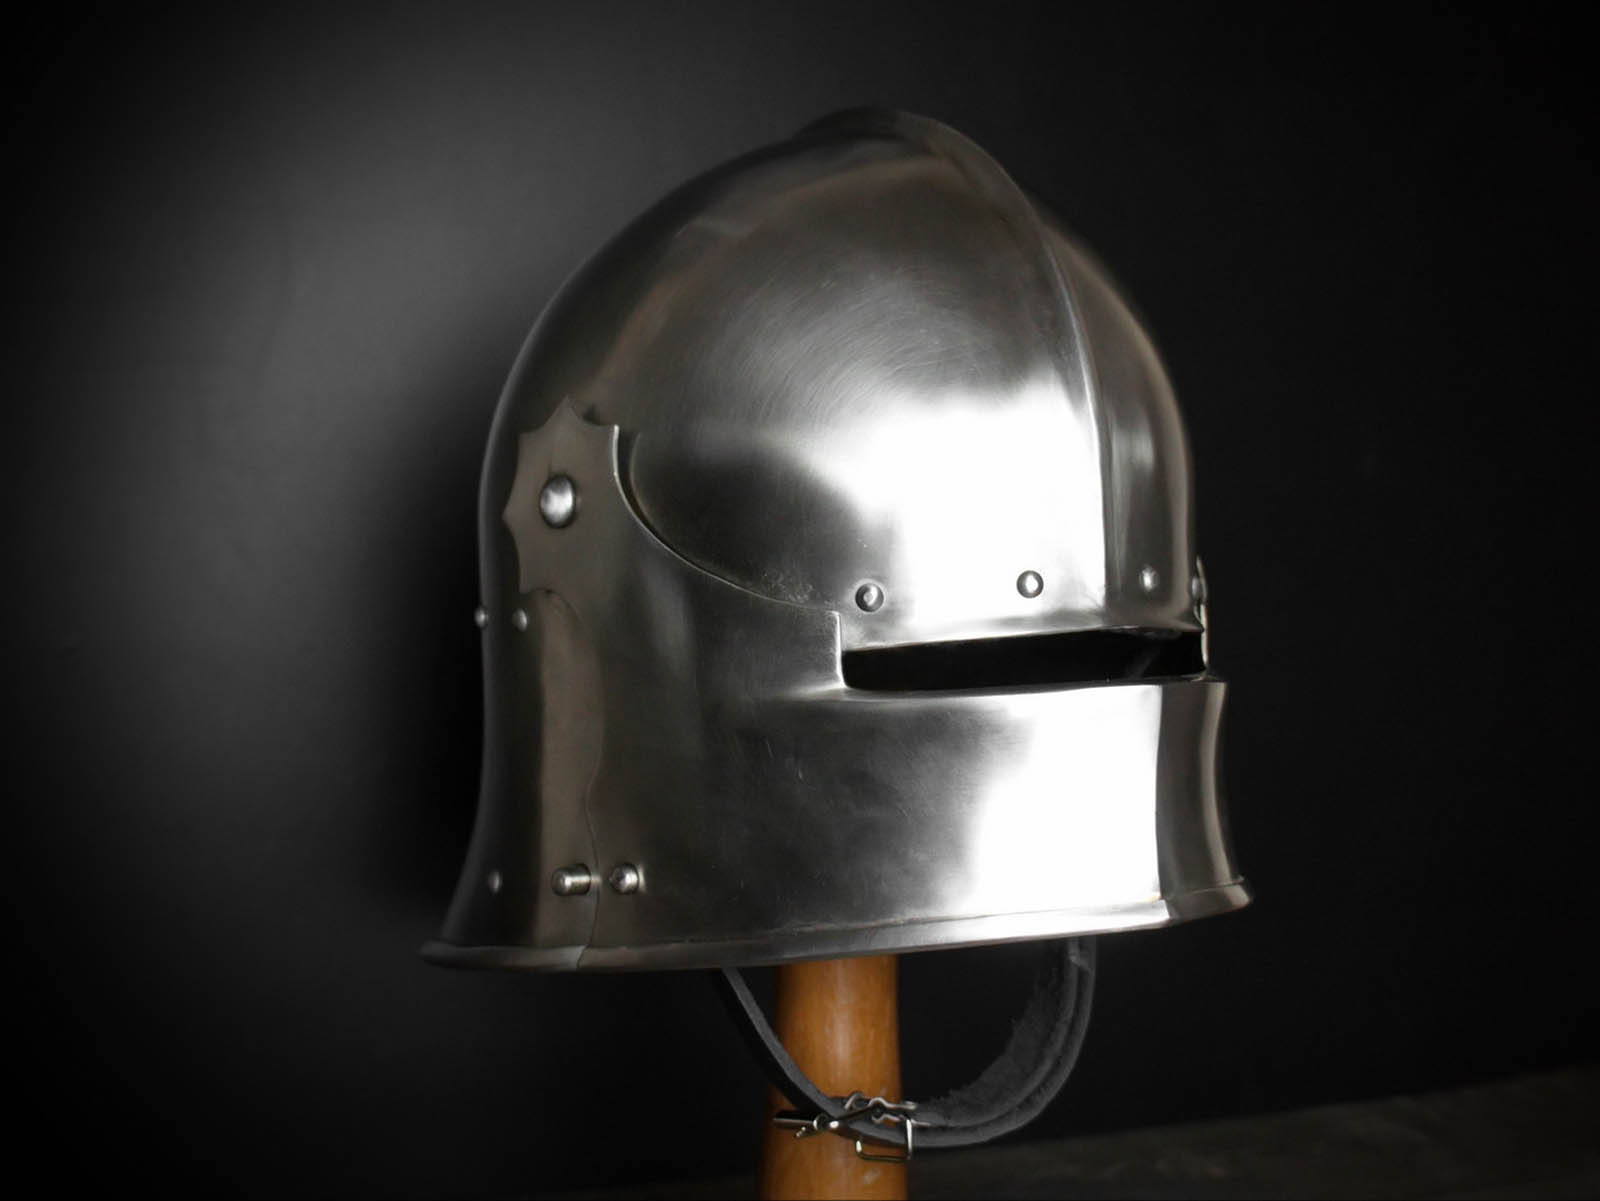 Gothic Sallet - brutal and lovely! New photos!